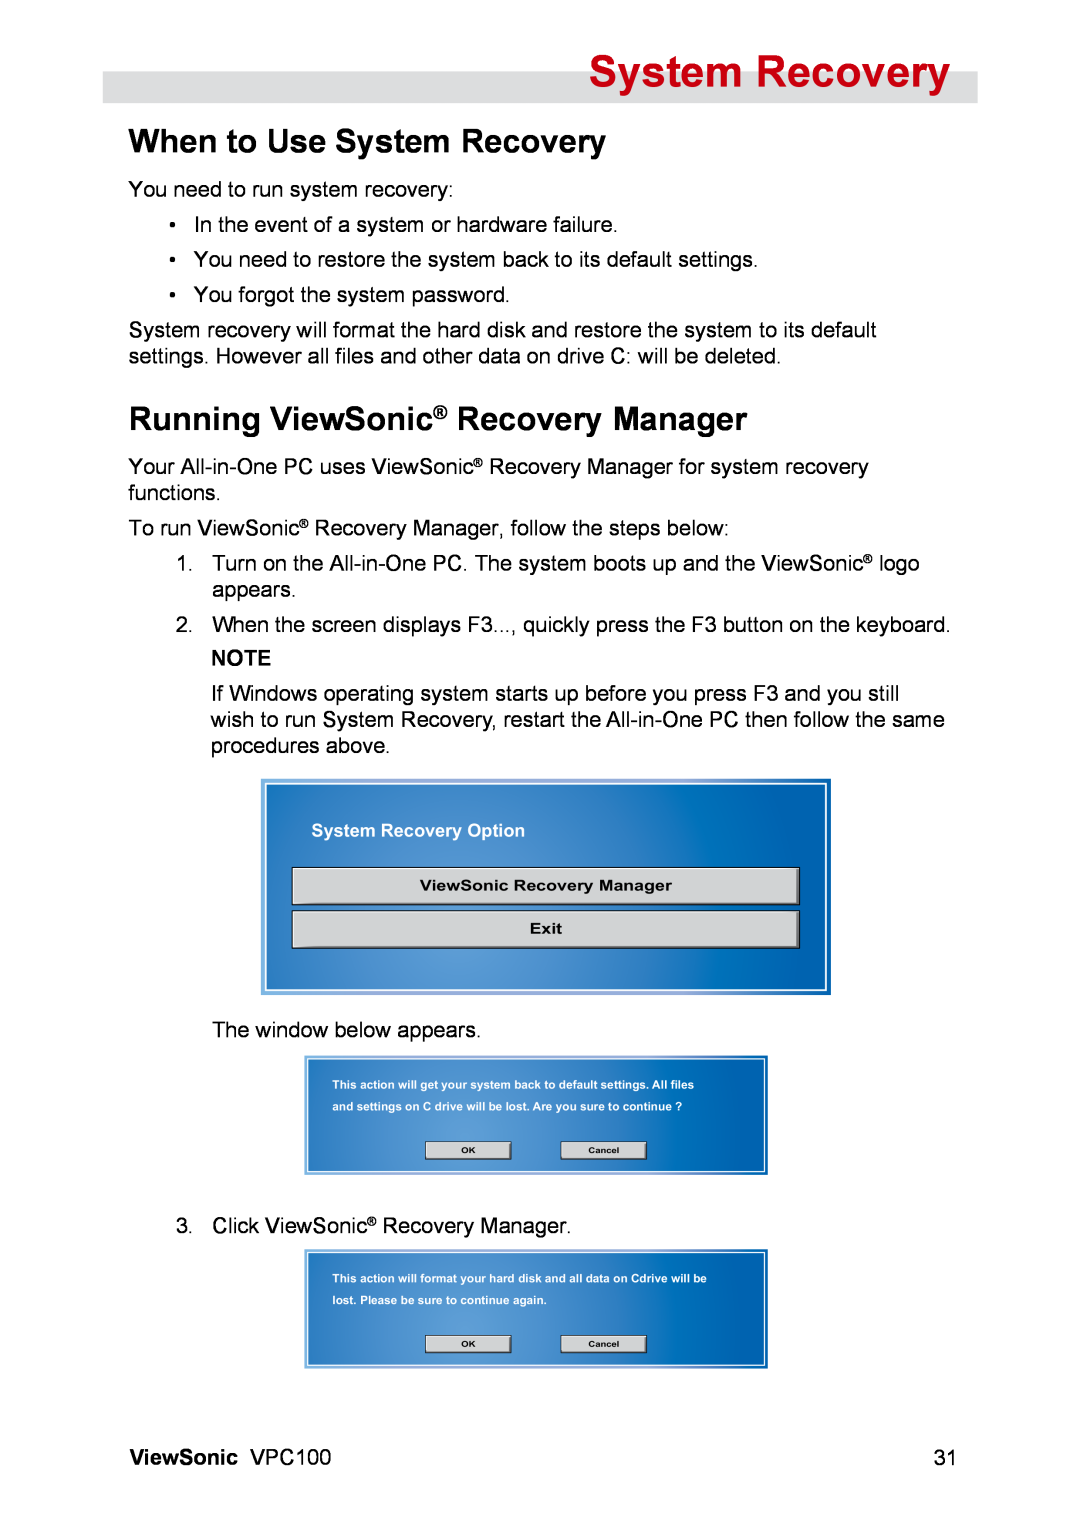 ViewSonic manual When to Use System Recovery, Running ViewSonic Recovery Manager, ViewSonic VPC100 